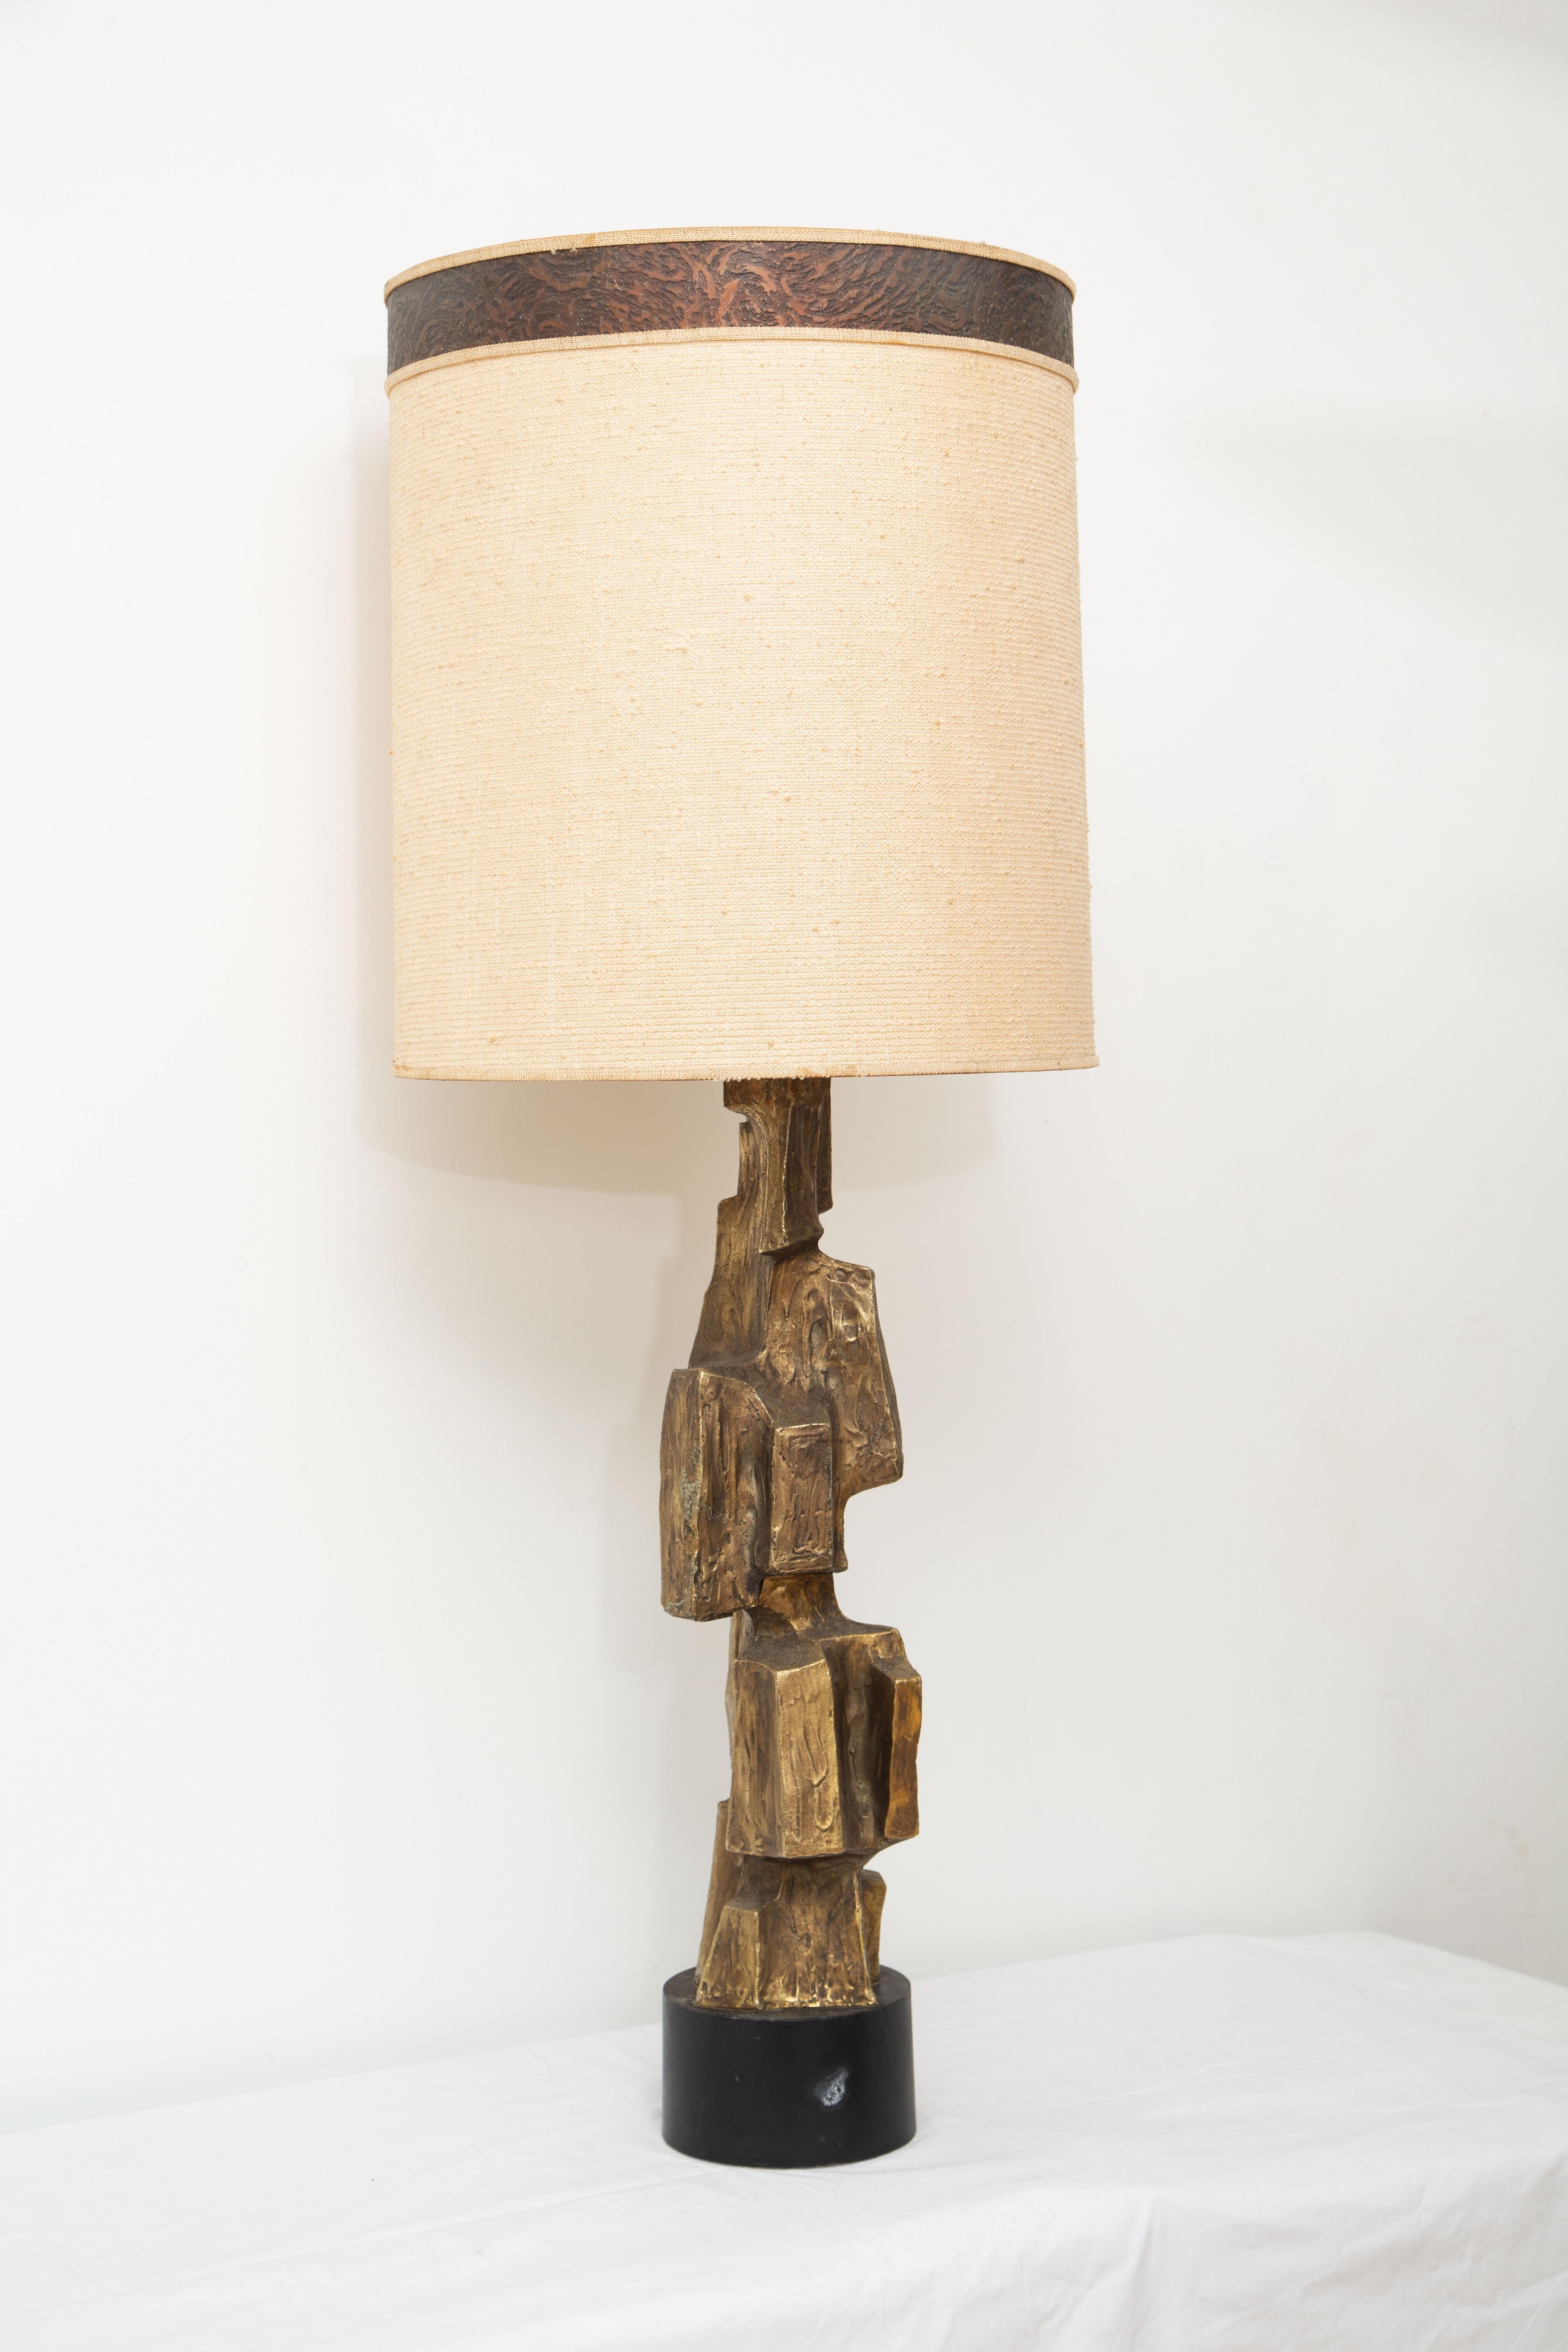 Brutalist vintage table lamp by Tempestini
Large sculptural cast aluminum with bronze patina
Metal base, 
Newly rewired
Original shade shows minor cosmetic wear
Shade: 21